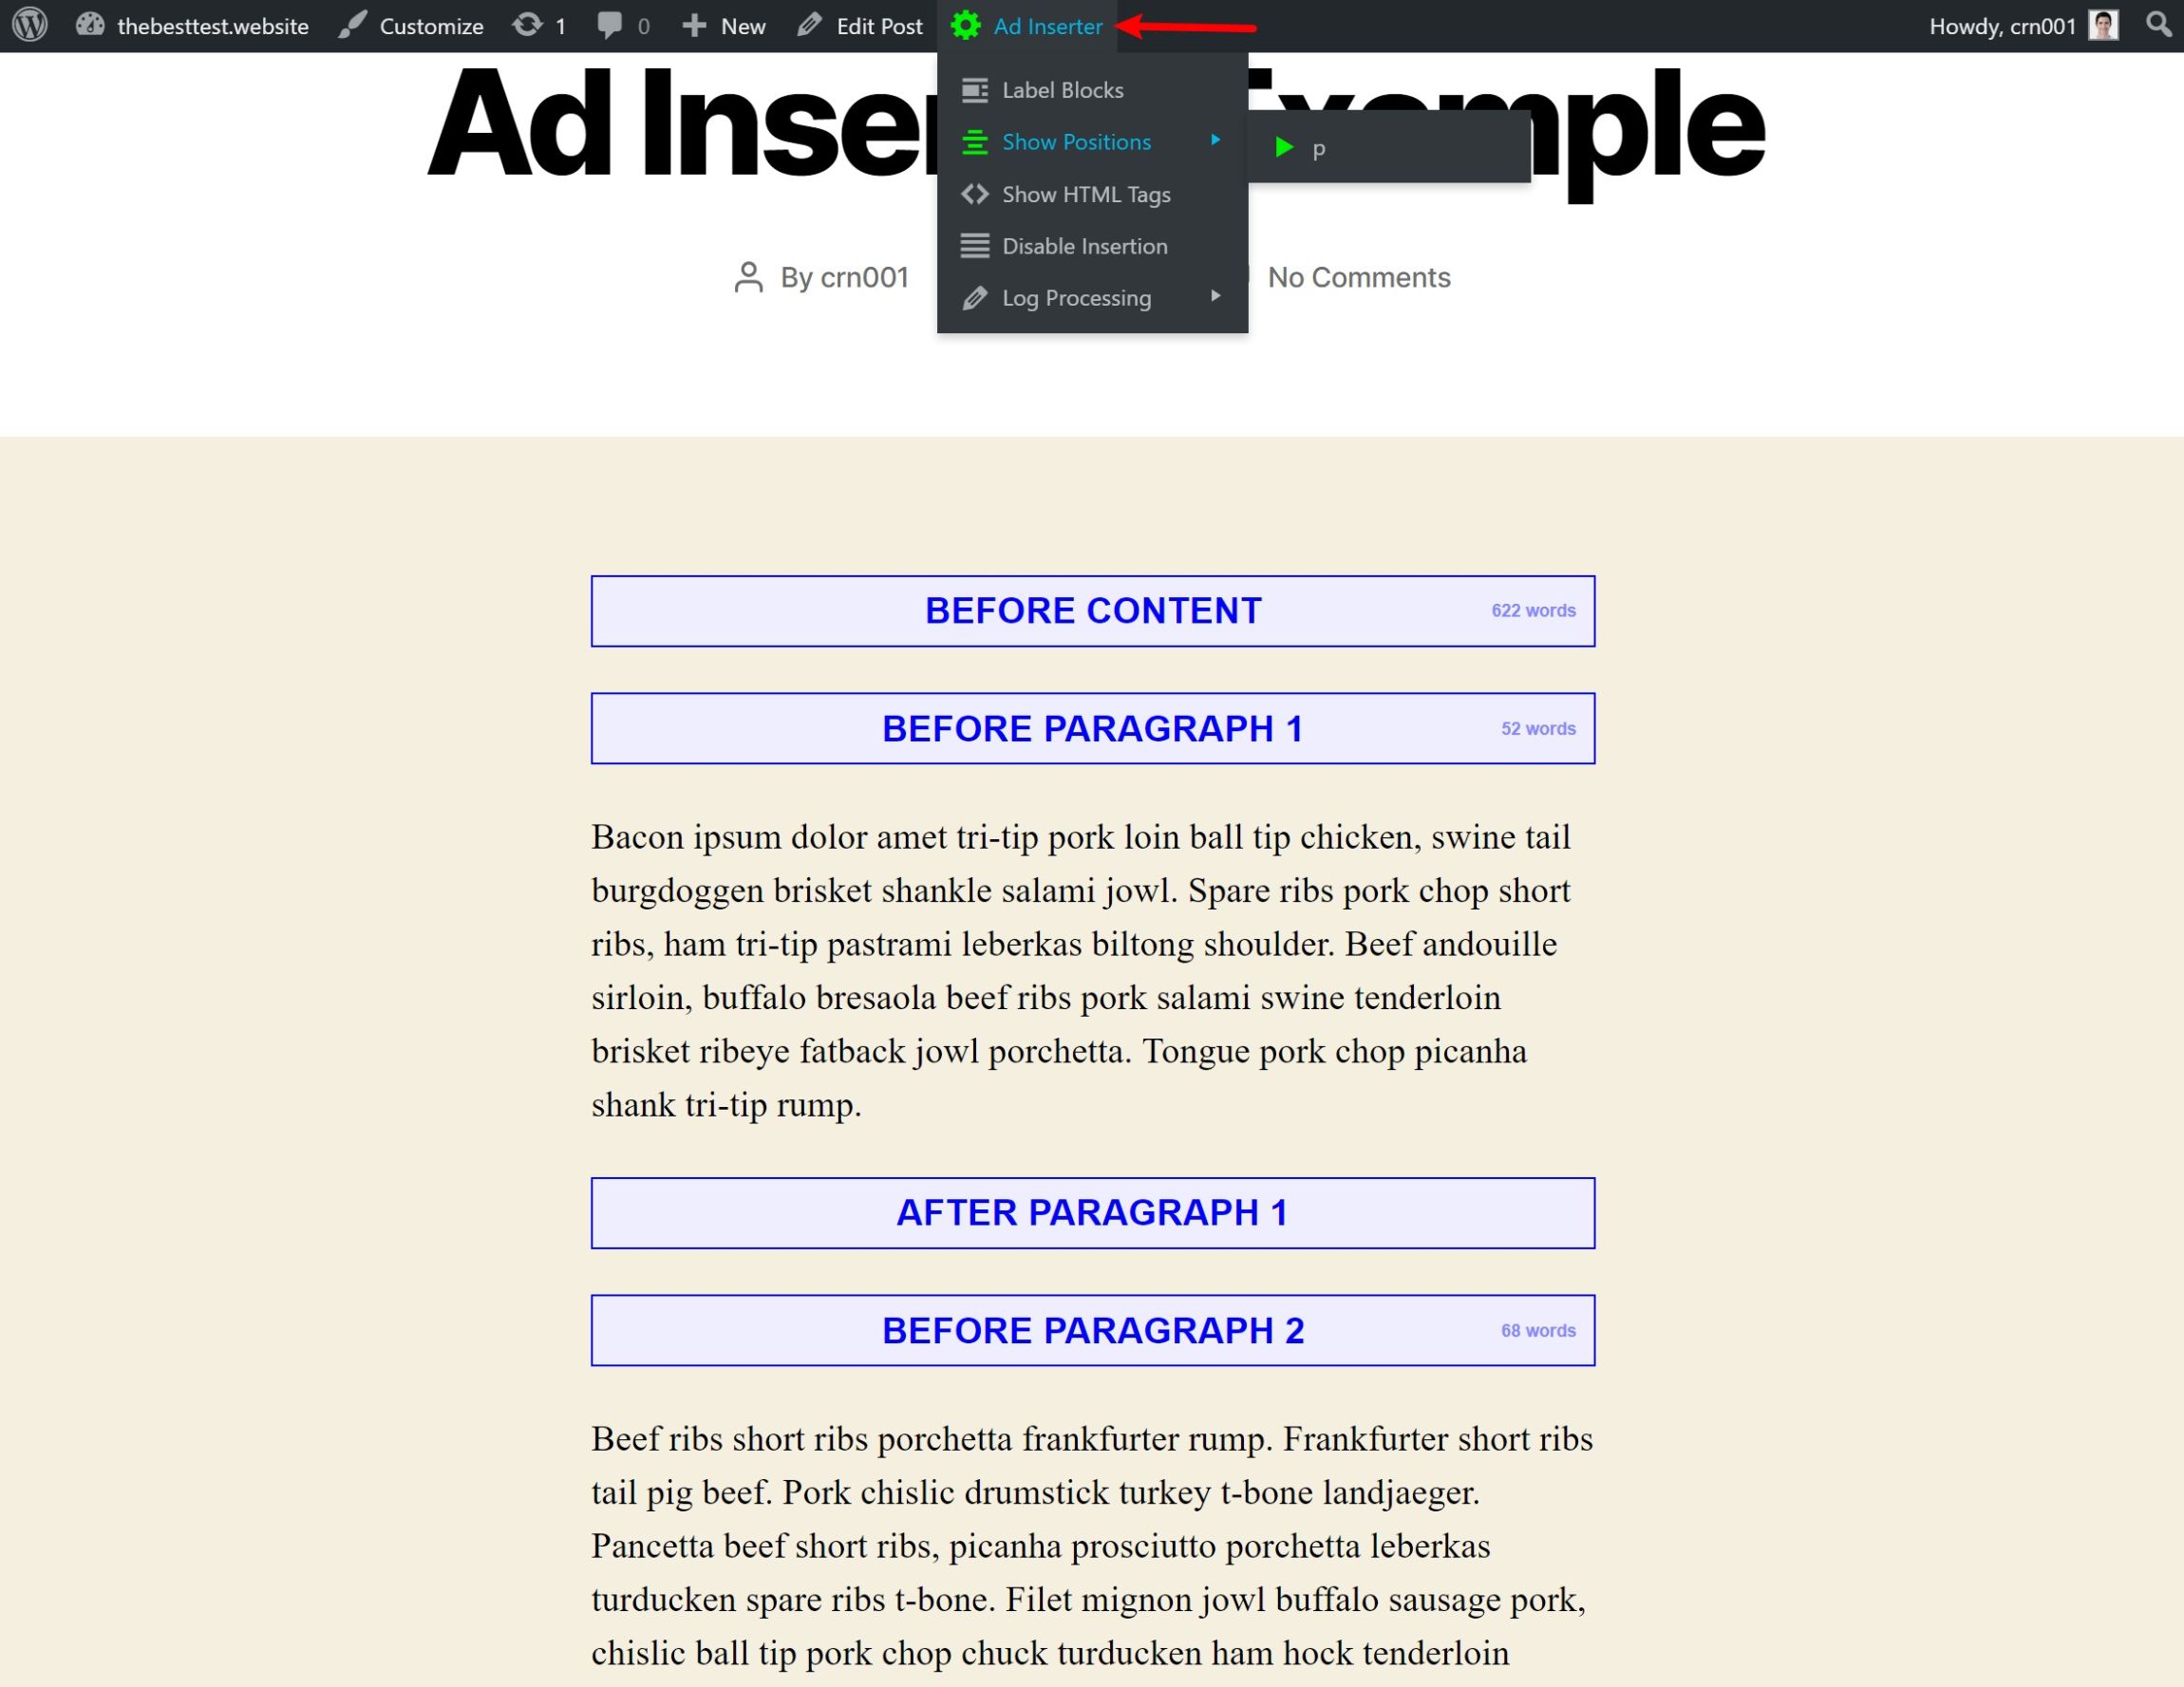 How to visualize Ad Inserter placements in your content